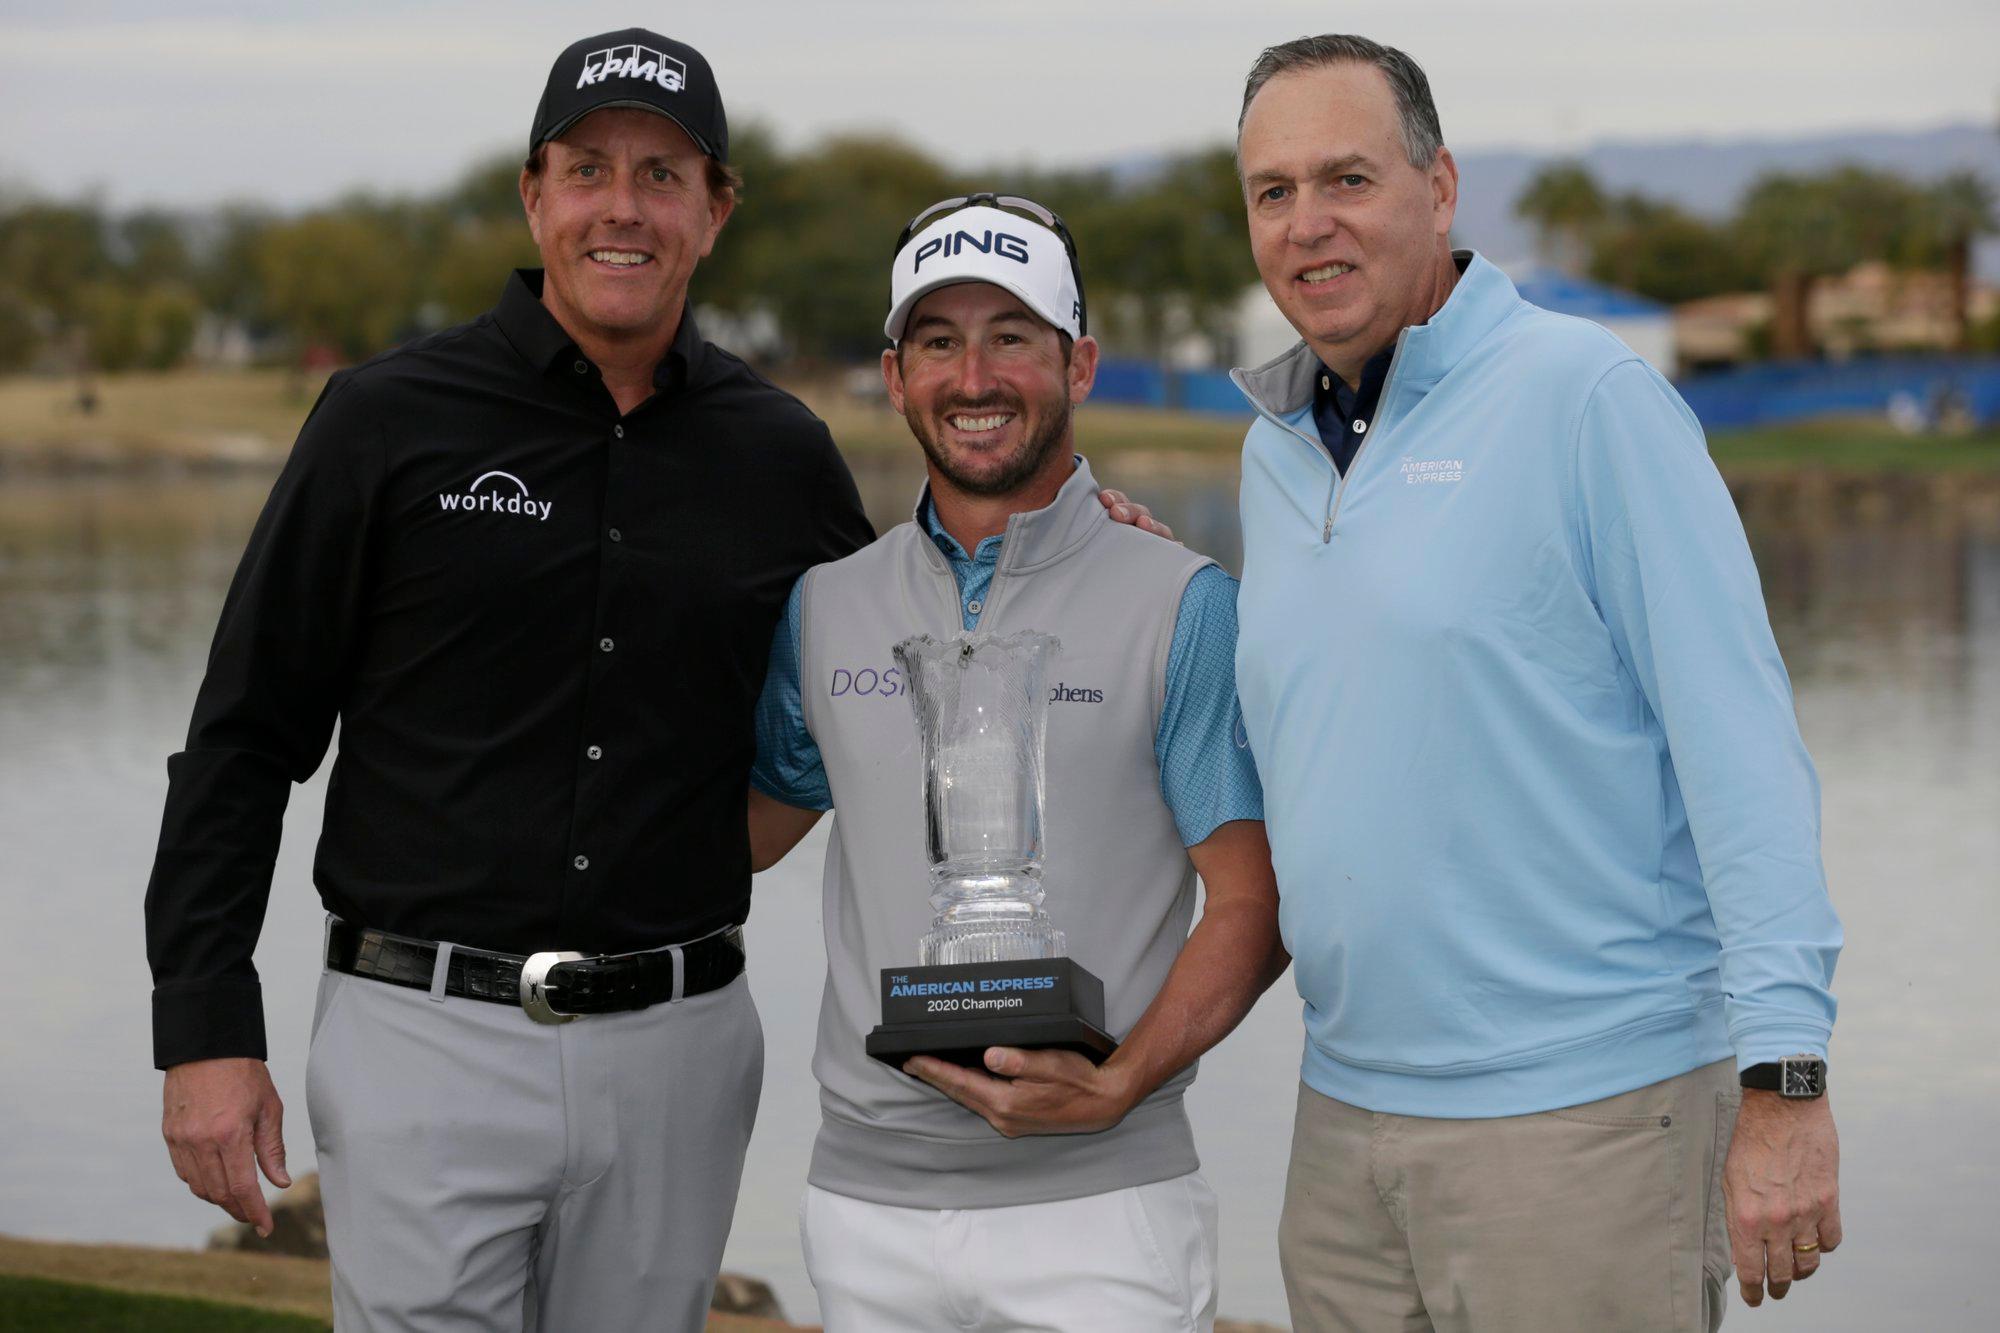 Andrew Landry, center, holds the trophy with Phil Mickelson, left, and CEO of American Express Steve Squeri after winning The American Express golf tournament on the Stadium Course at PGA West in La Quinta, Calif., Sunday, Jan. 19, 2020. (AP Photo/Alex Gallardo)